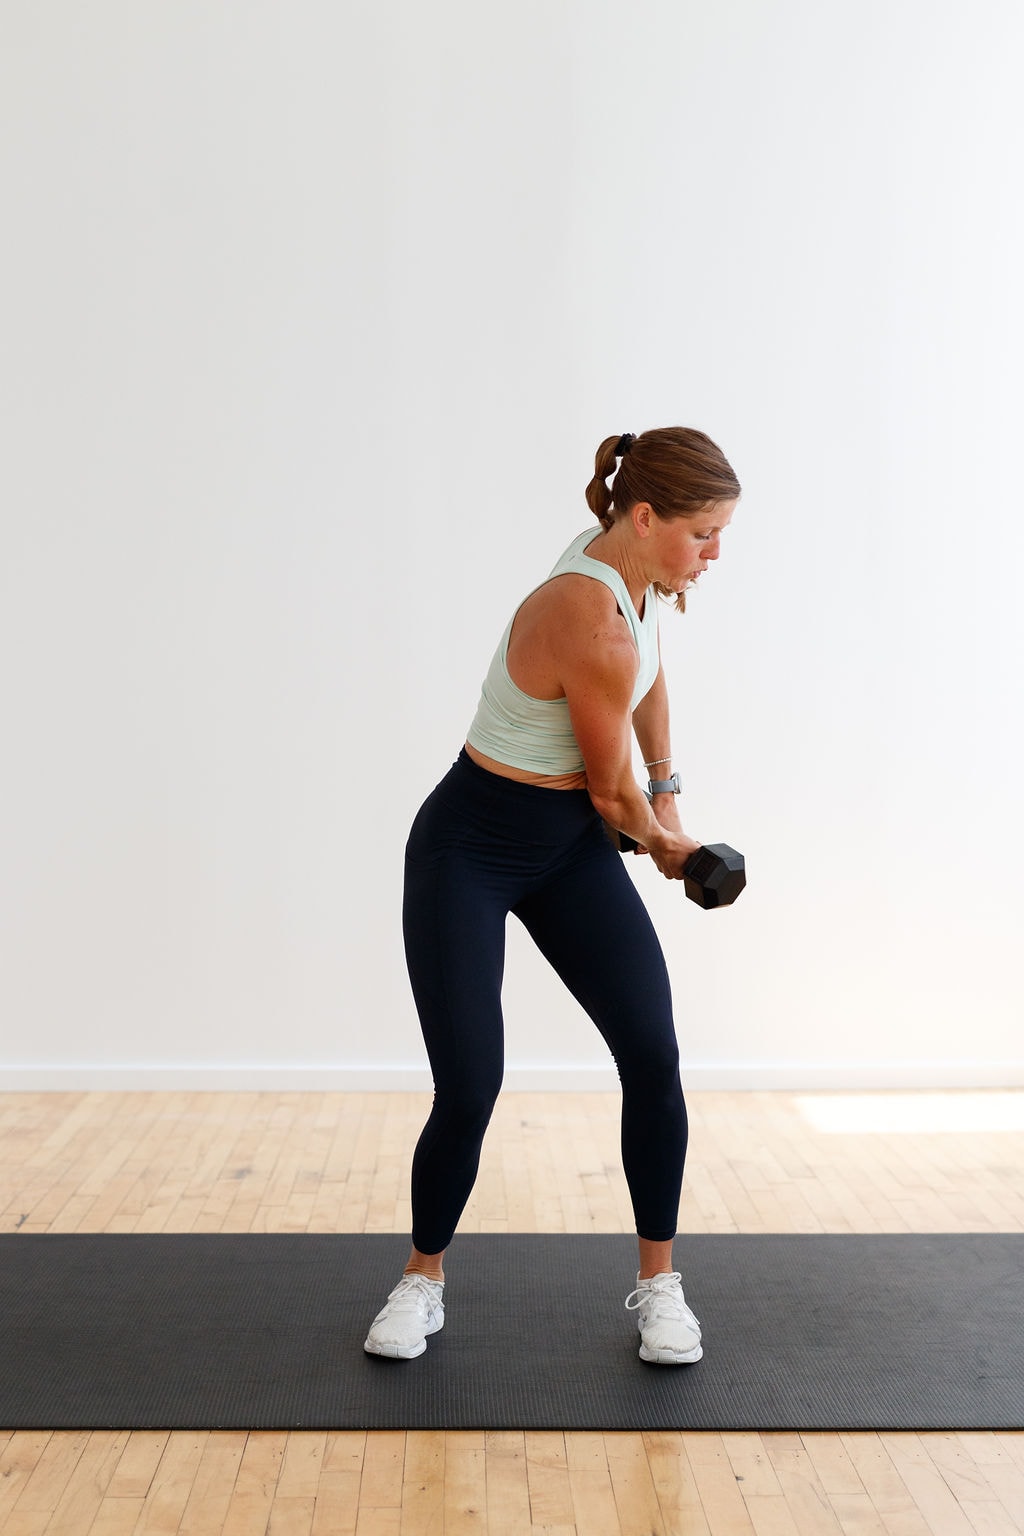 5 HIIT Exercises That Target Your Arms and Abs (at the same time)! -  Nourish, Move, Love